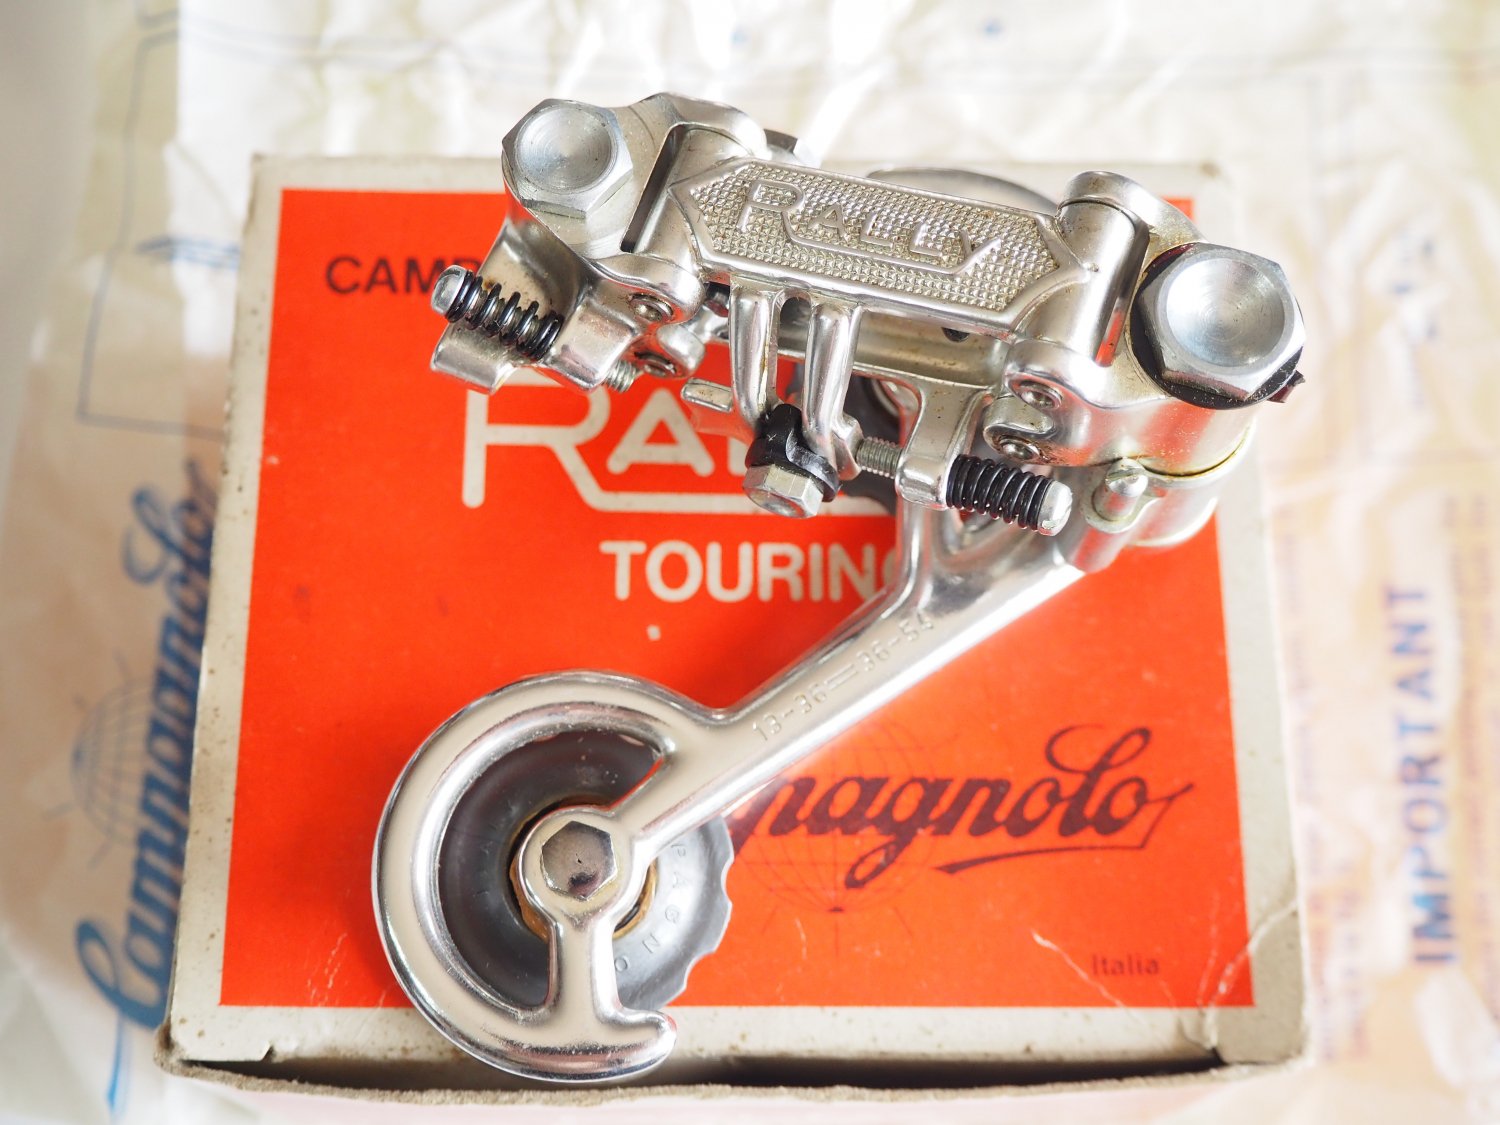 CAMPAGNOLO RALLY TOURING